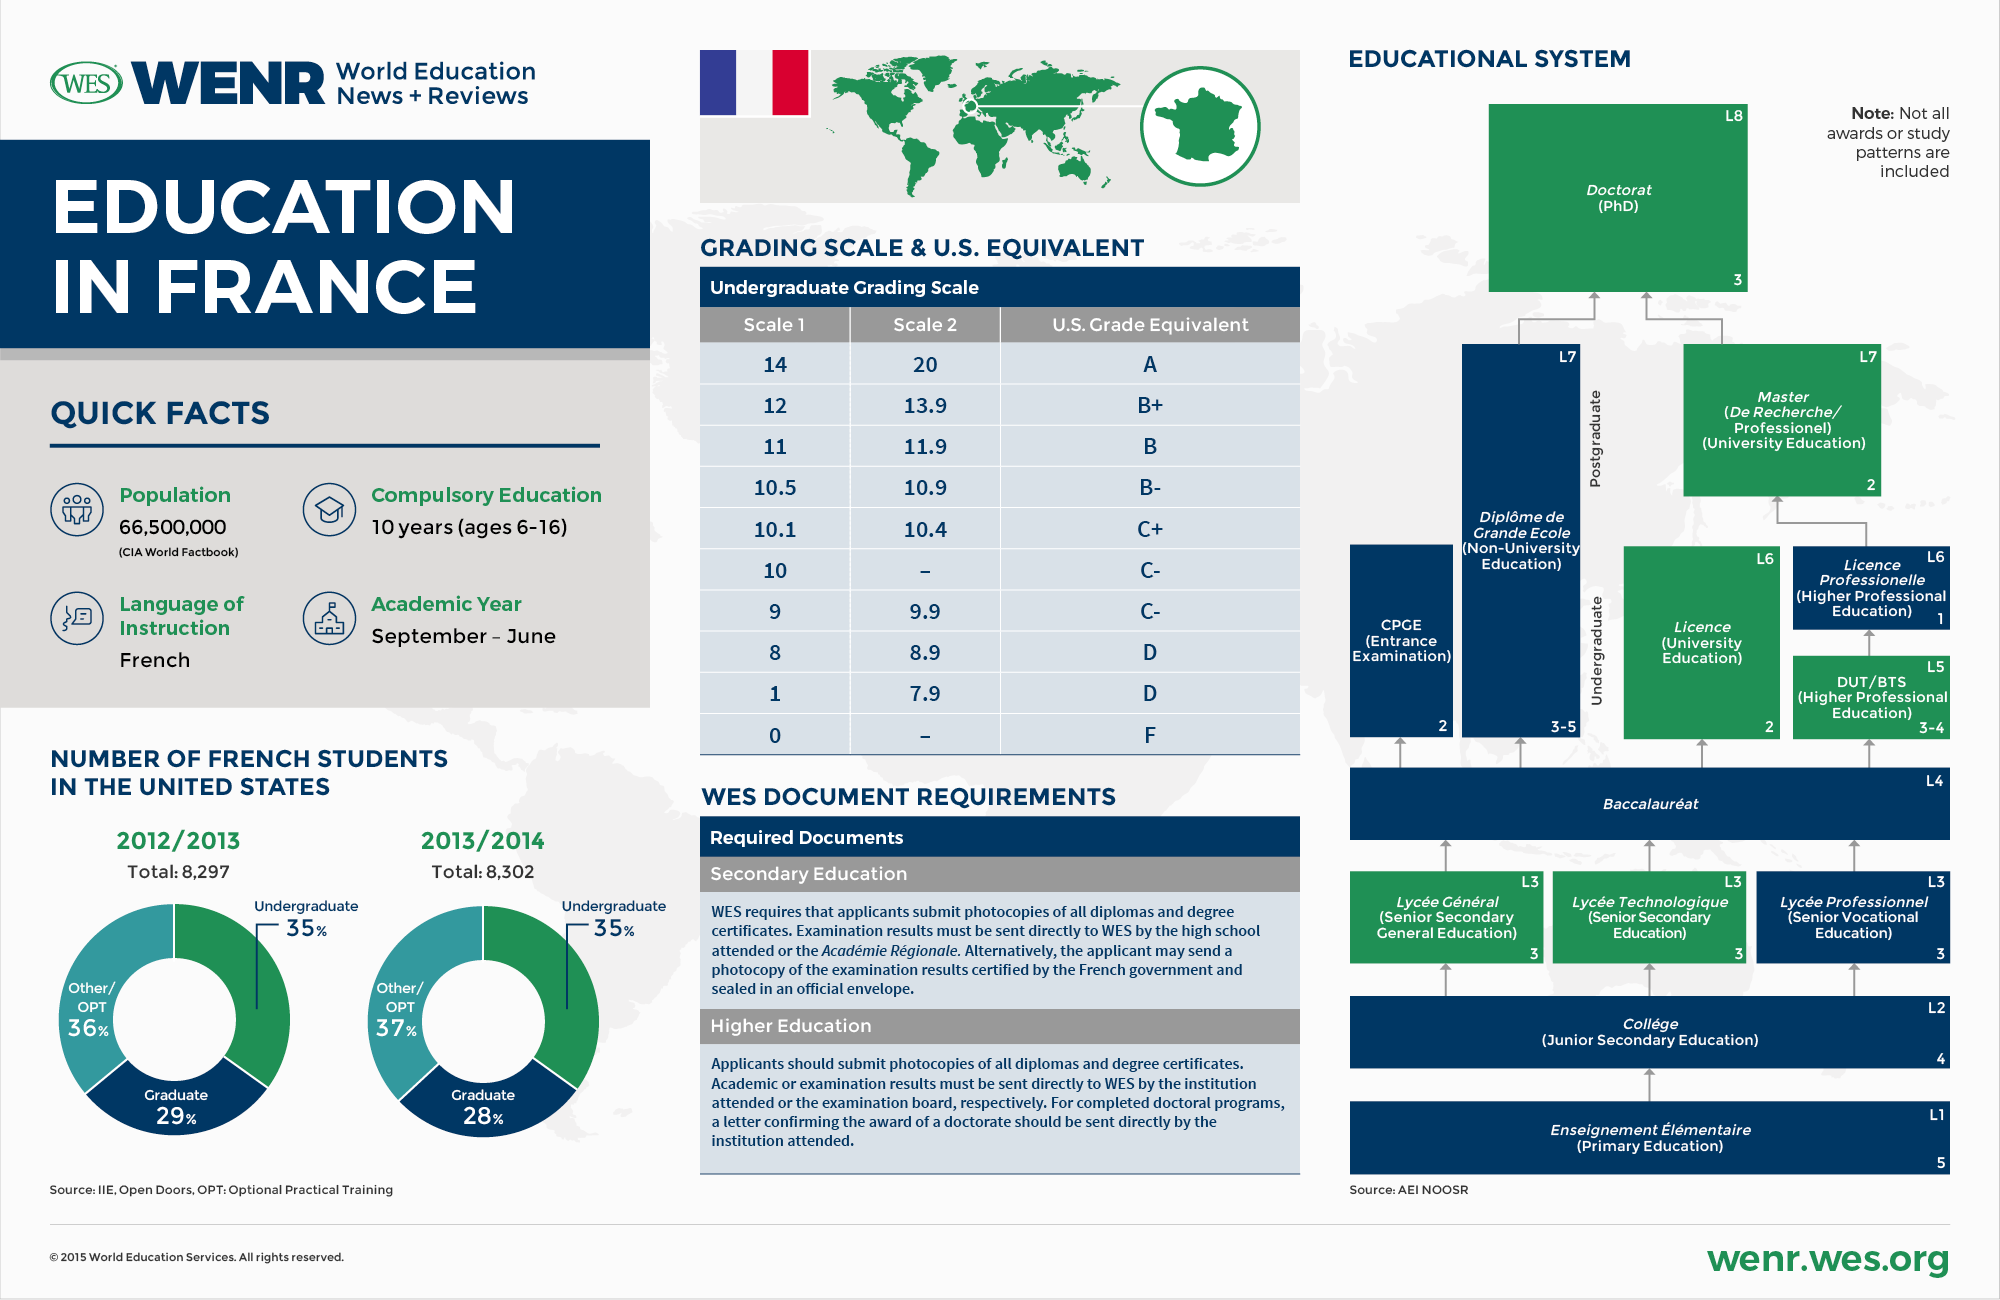 An infographic with fast facts on France's educational system and international student mobility landscape. 